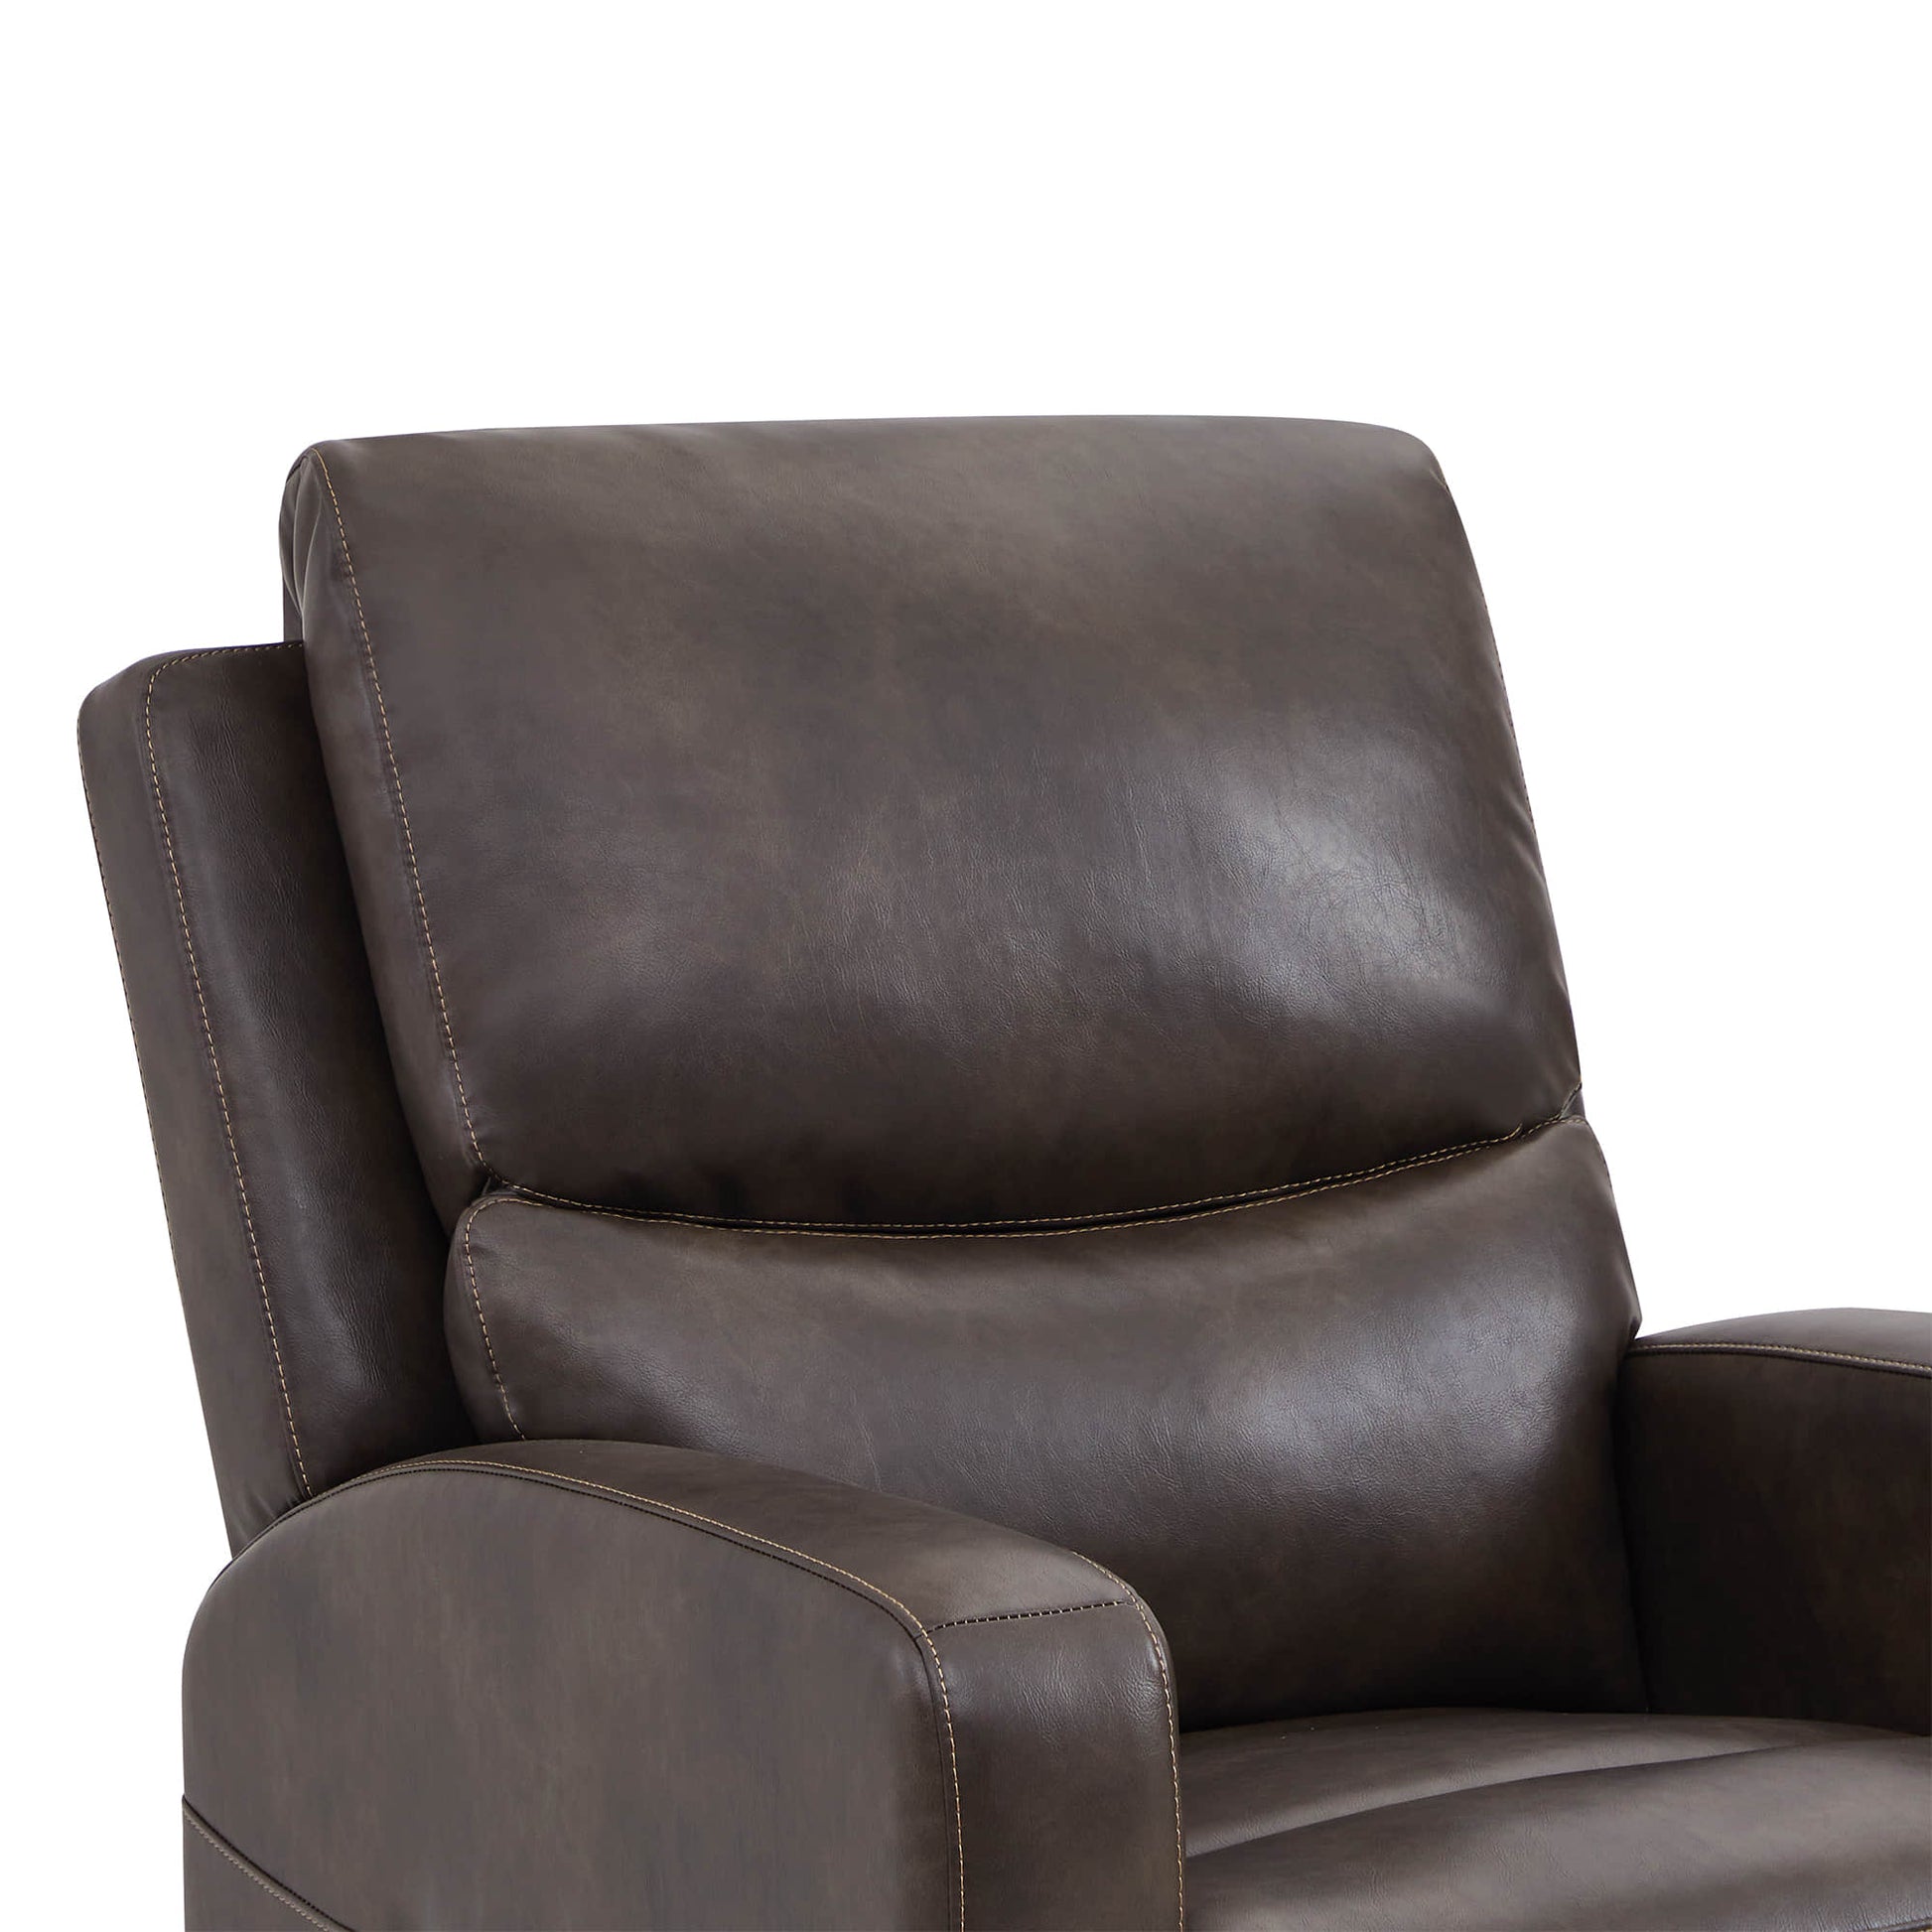 CHITA LIVING-Finley Power Lift Chair Recliner For Elderly-Lift Chair-Faux Leather-Chocolate-